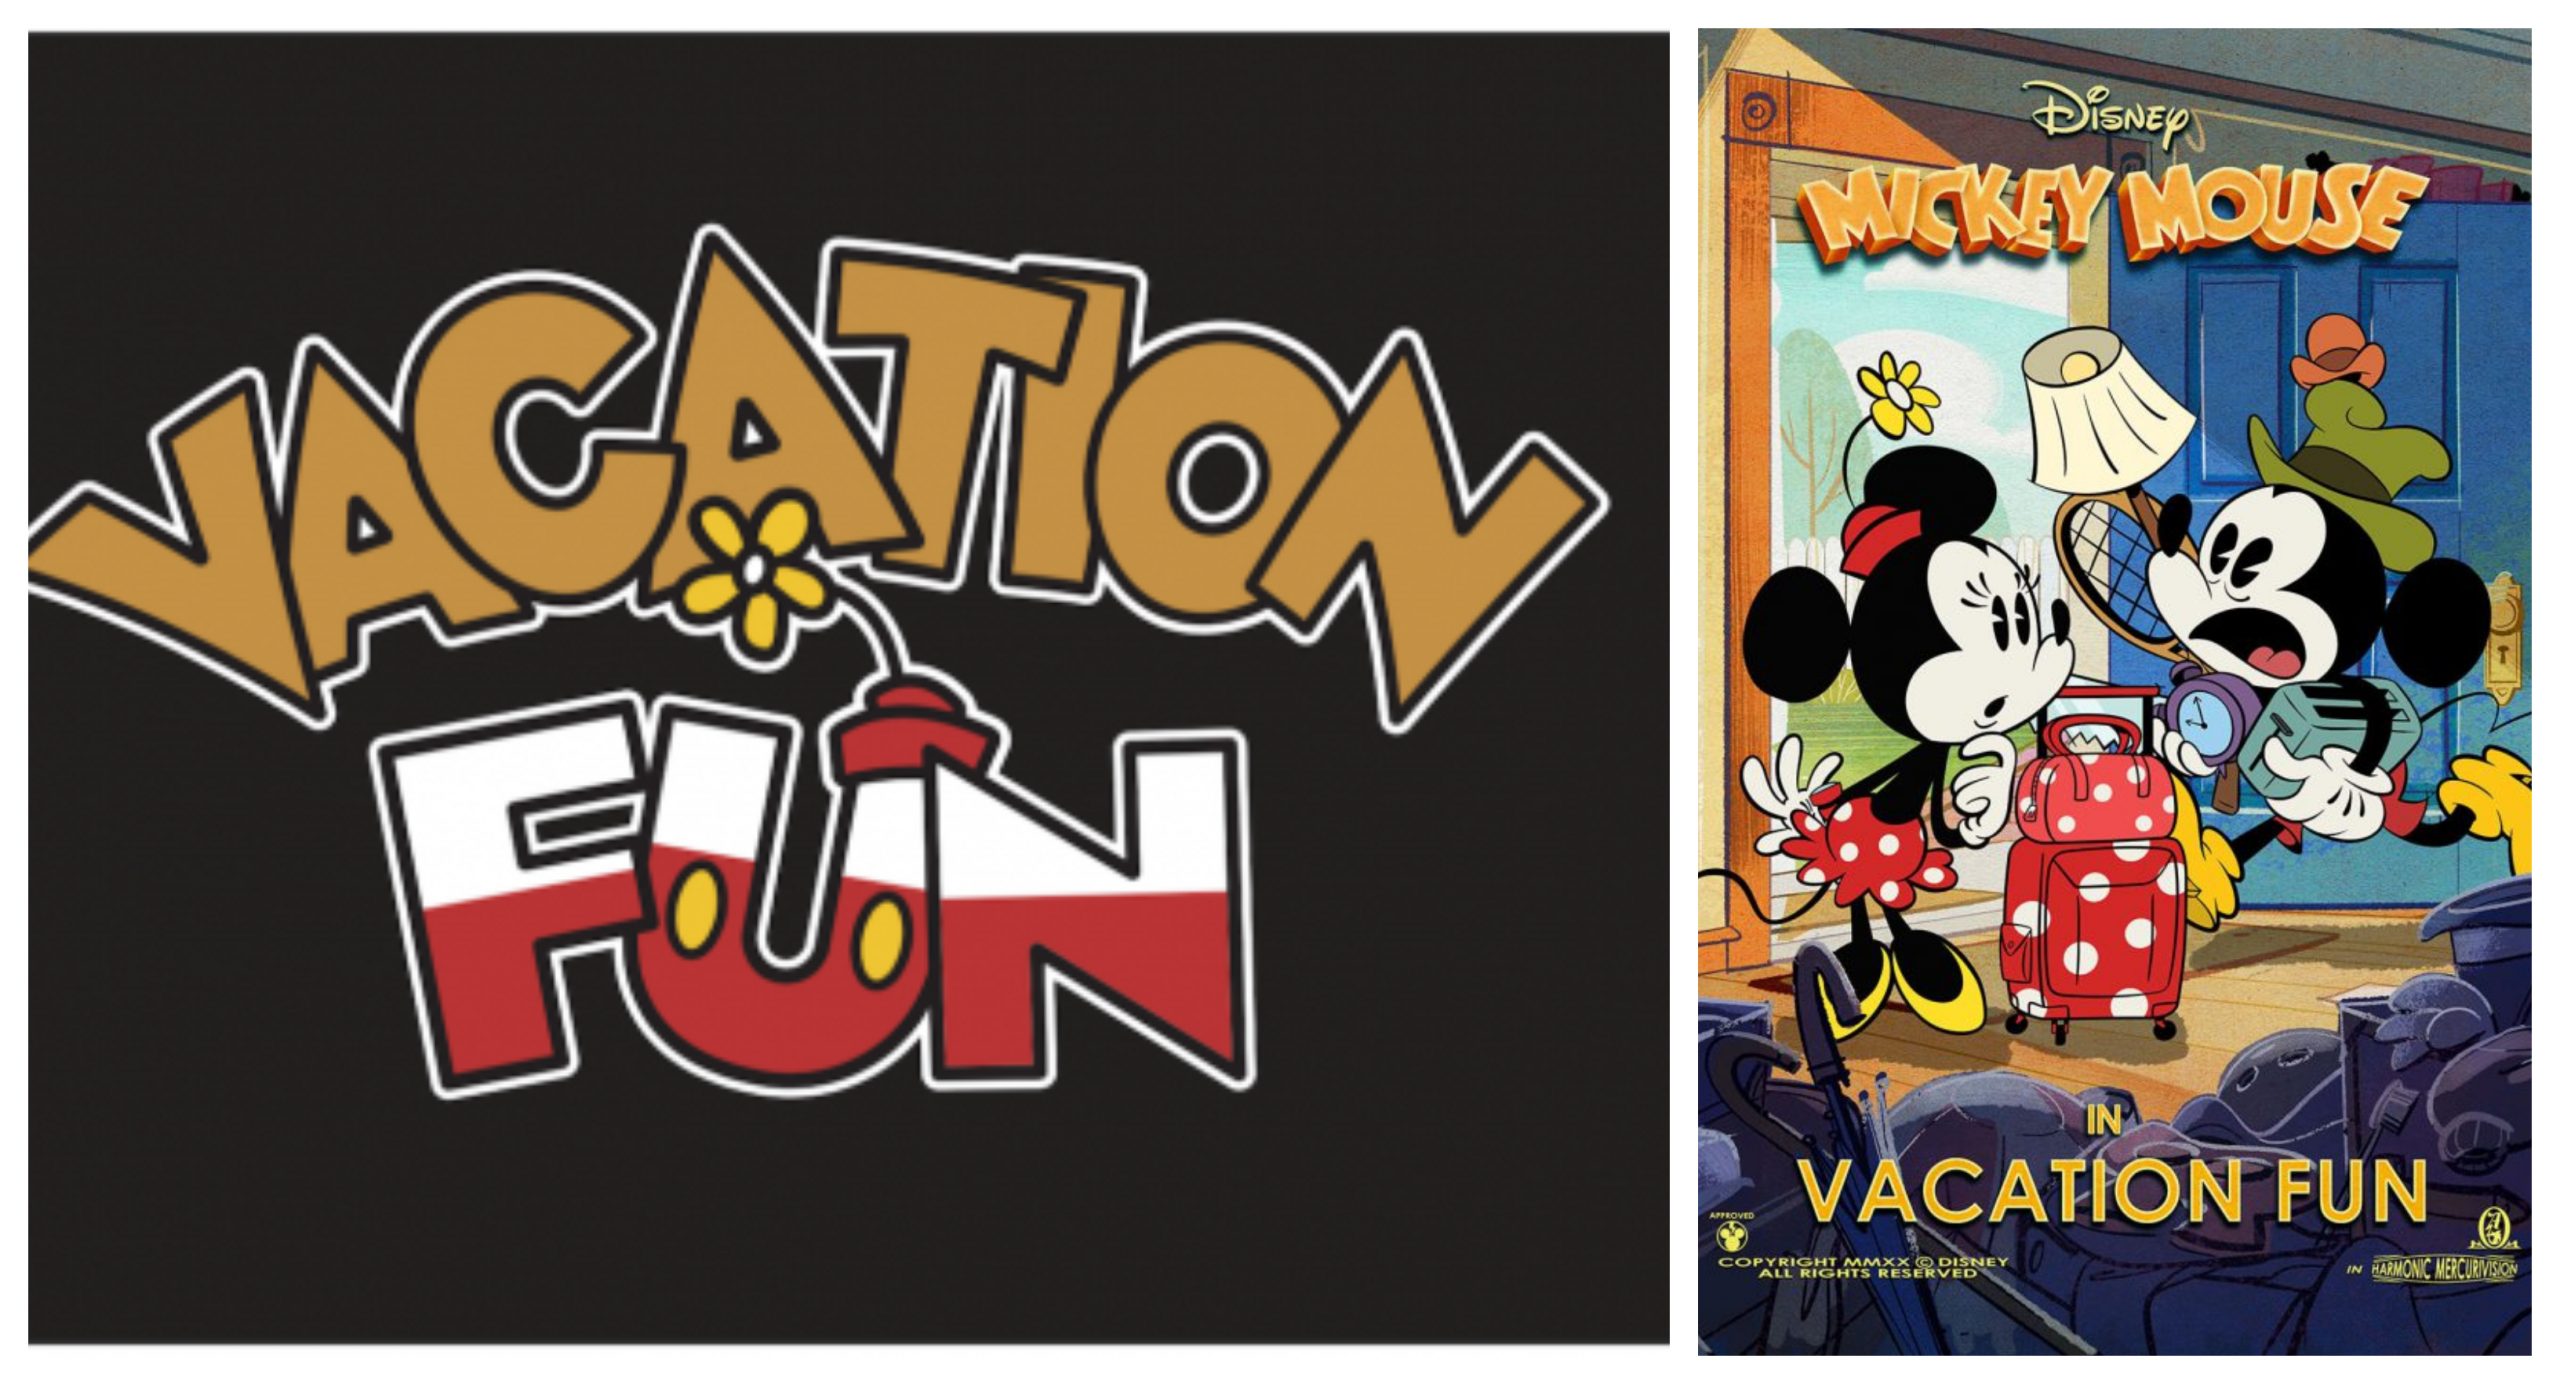 Mickey Shorts Theater to open March 4th in Hollywood Studios with new short Vacation Fun!